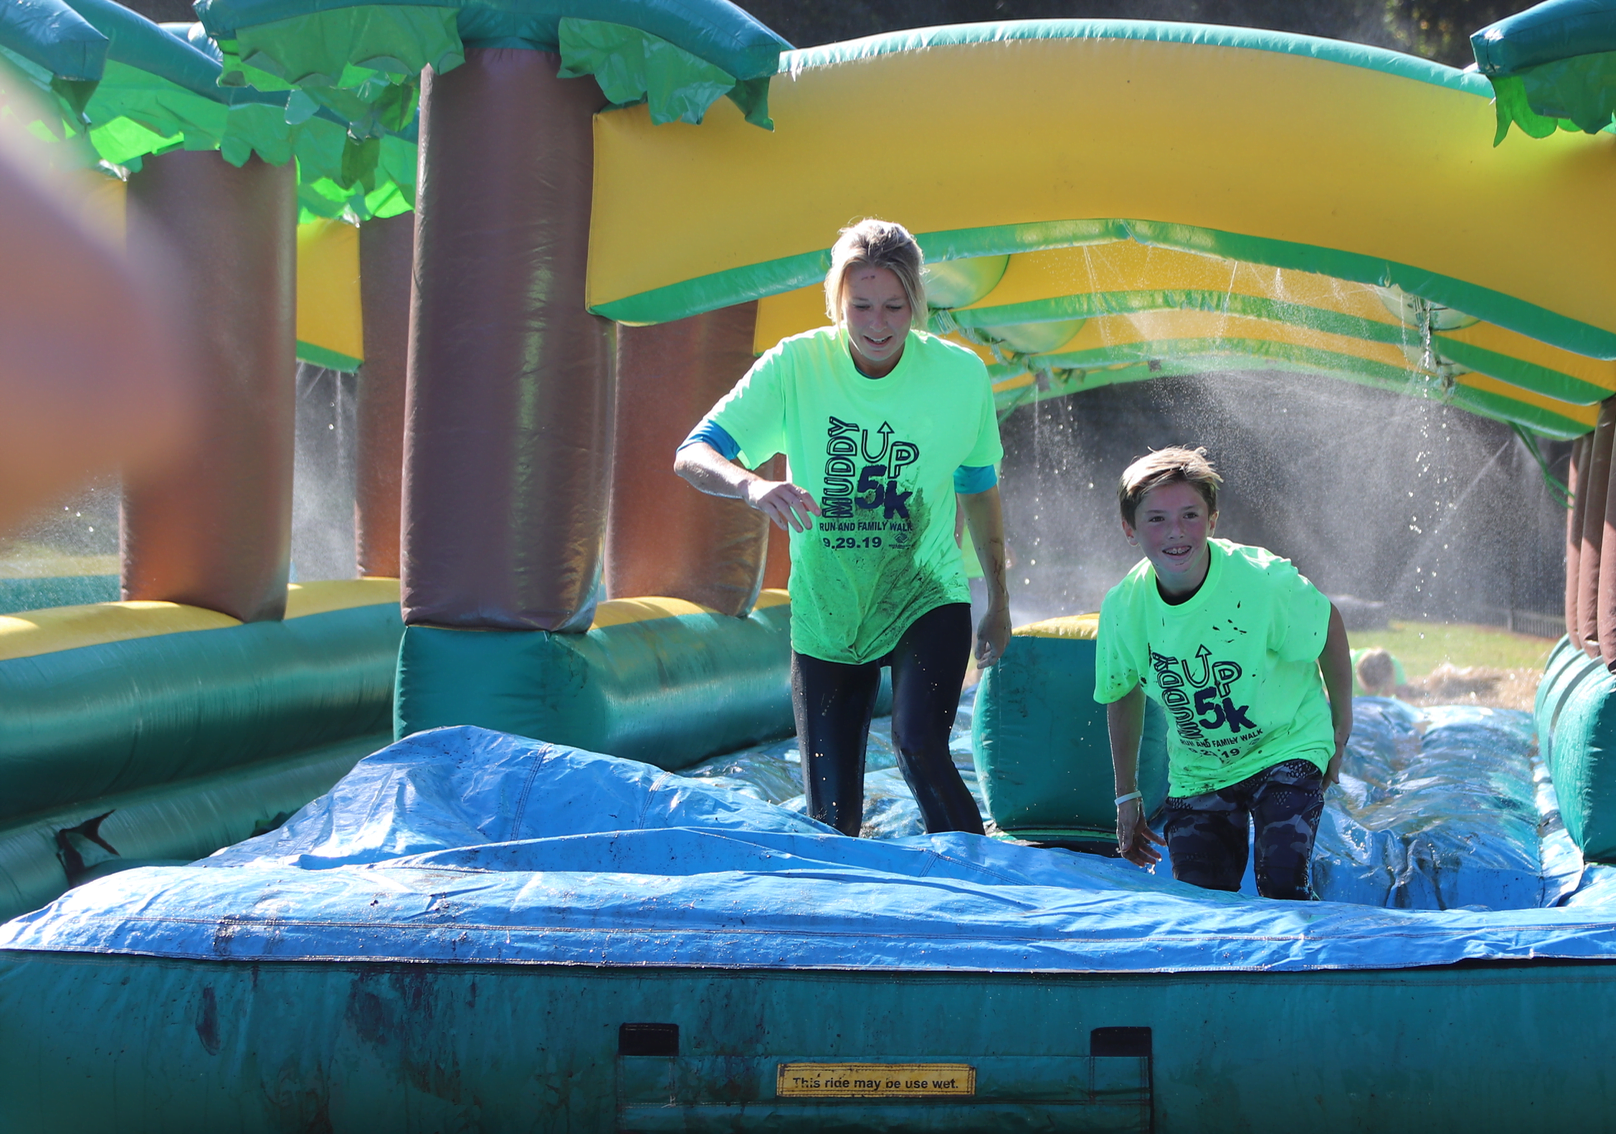 The boys and Girls Club of Greenwich's 8th annual Muddy Up fundraiser at Camp Simmons. Sept 29, 2019 Photo: Leslie Yager